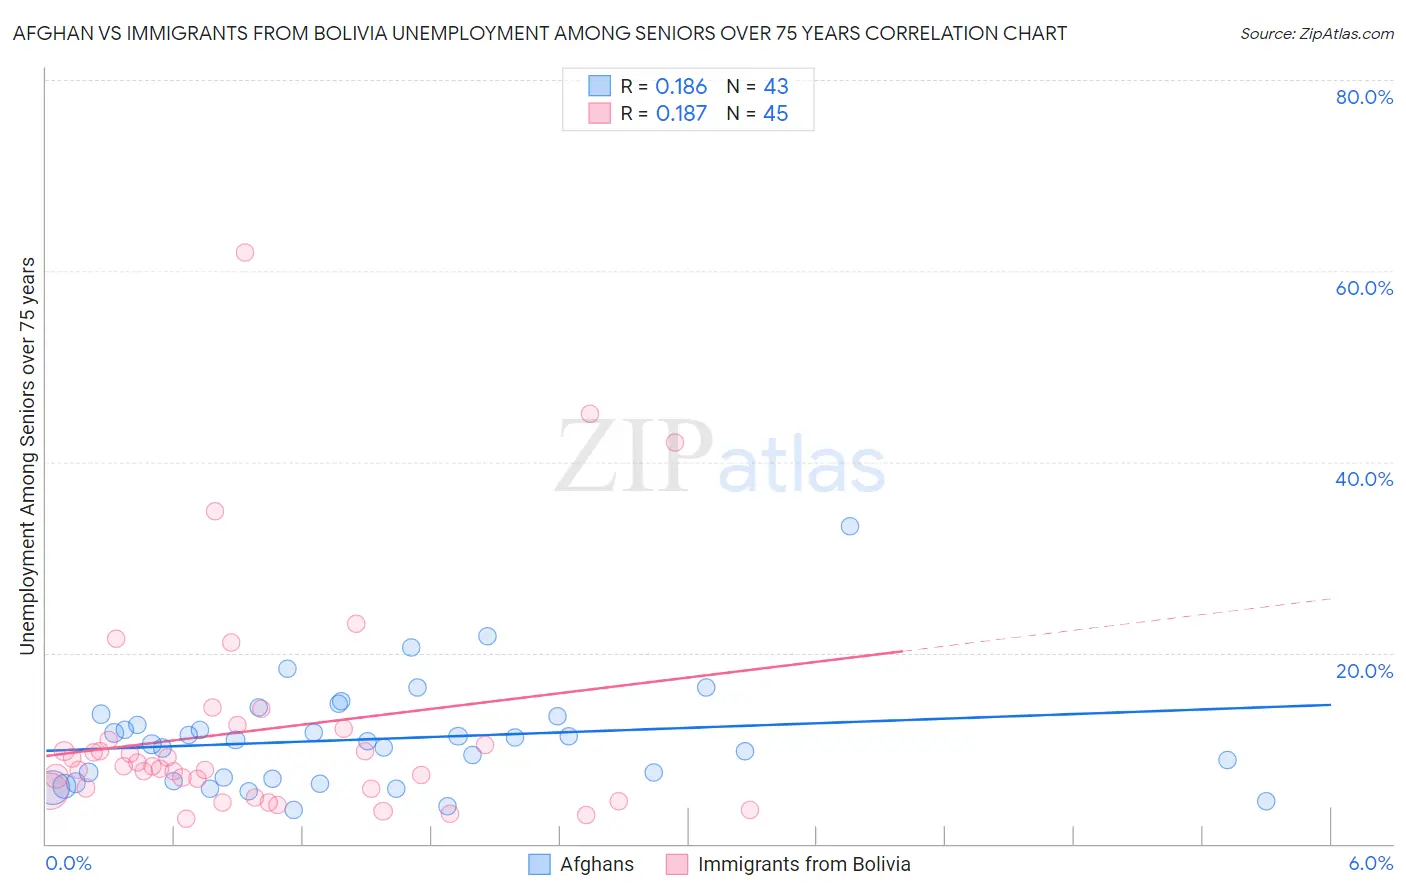 Afghan vs Immigrants from Bolivia Unemployment Among Seniors over 75 years